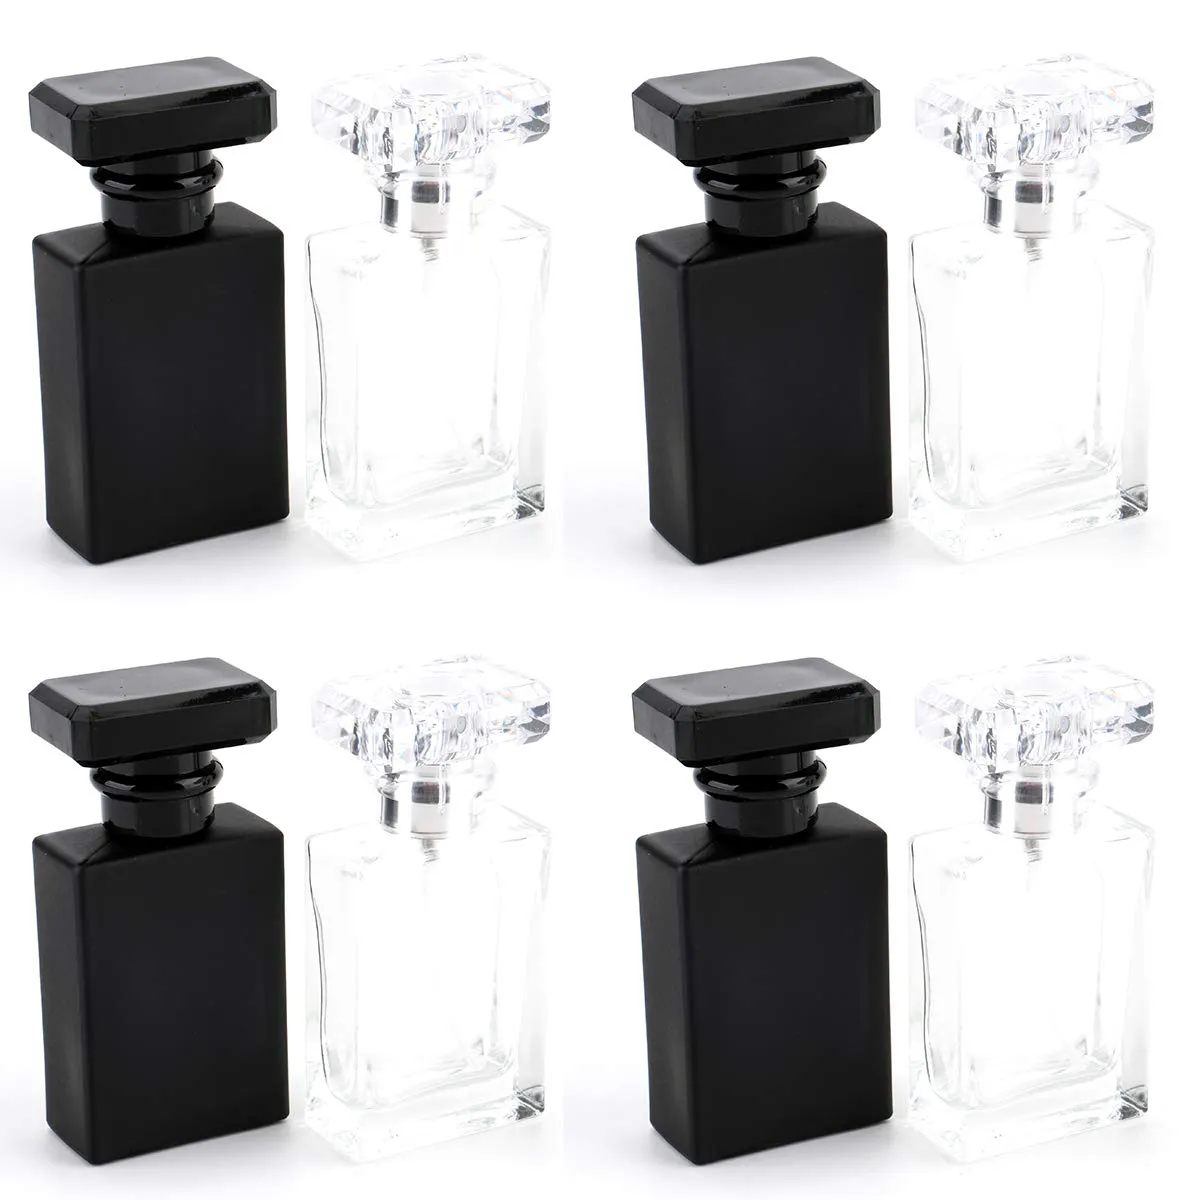 30ml / 1 oz. Refillable Perfume Bottle, Square Empty Glass Perfume Atomizer Bottle with Spray Applicator, Transparent and Black Assorted